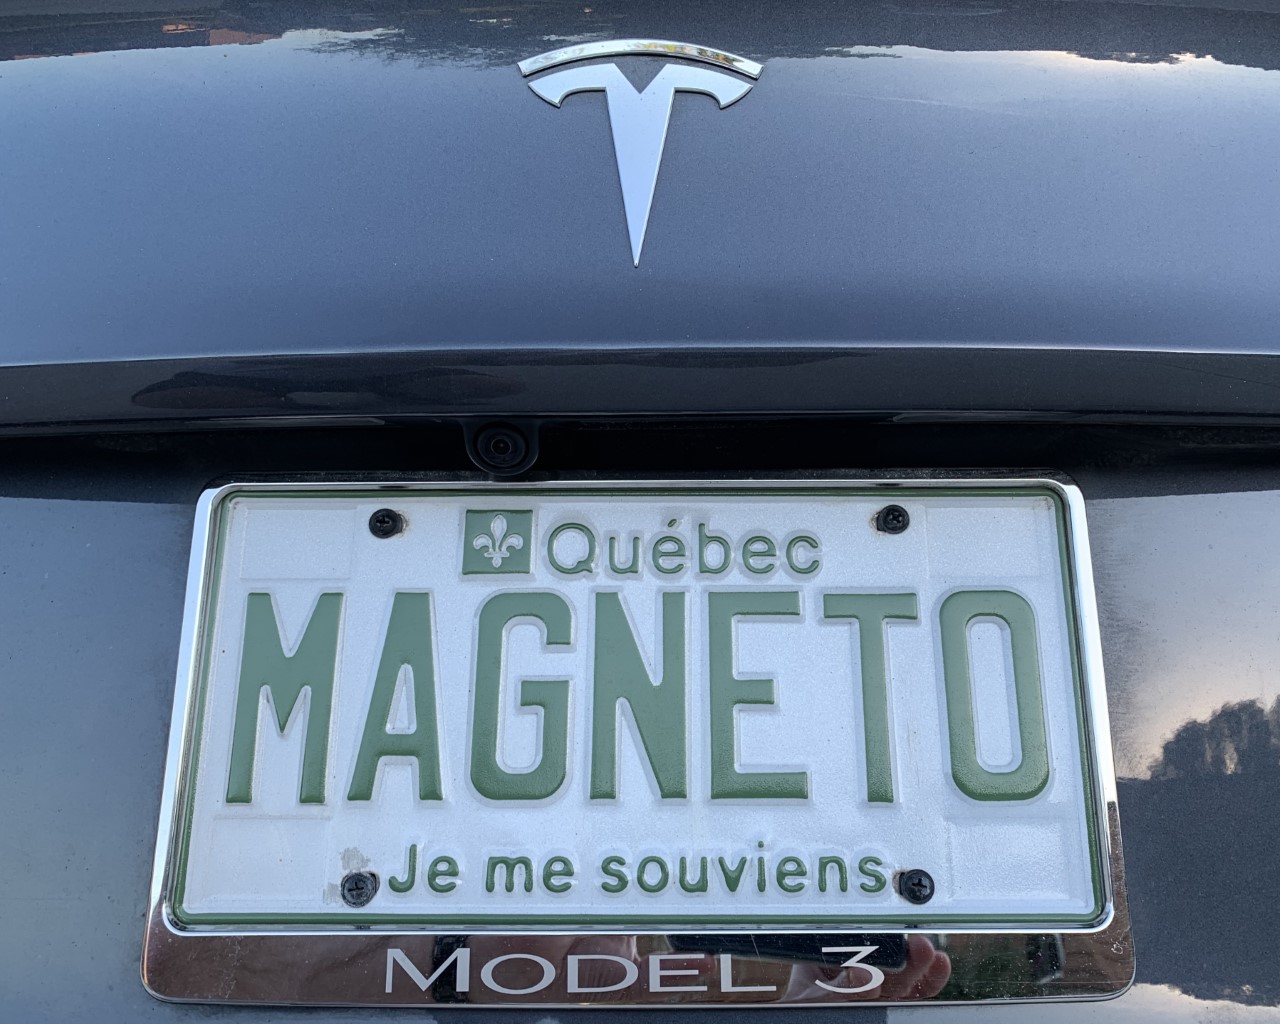 Ian's Tesla Model 3 with the 'MAGNETO' number plate.